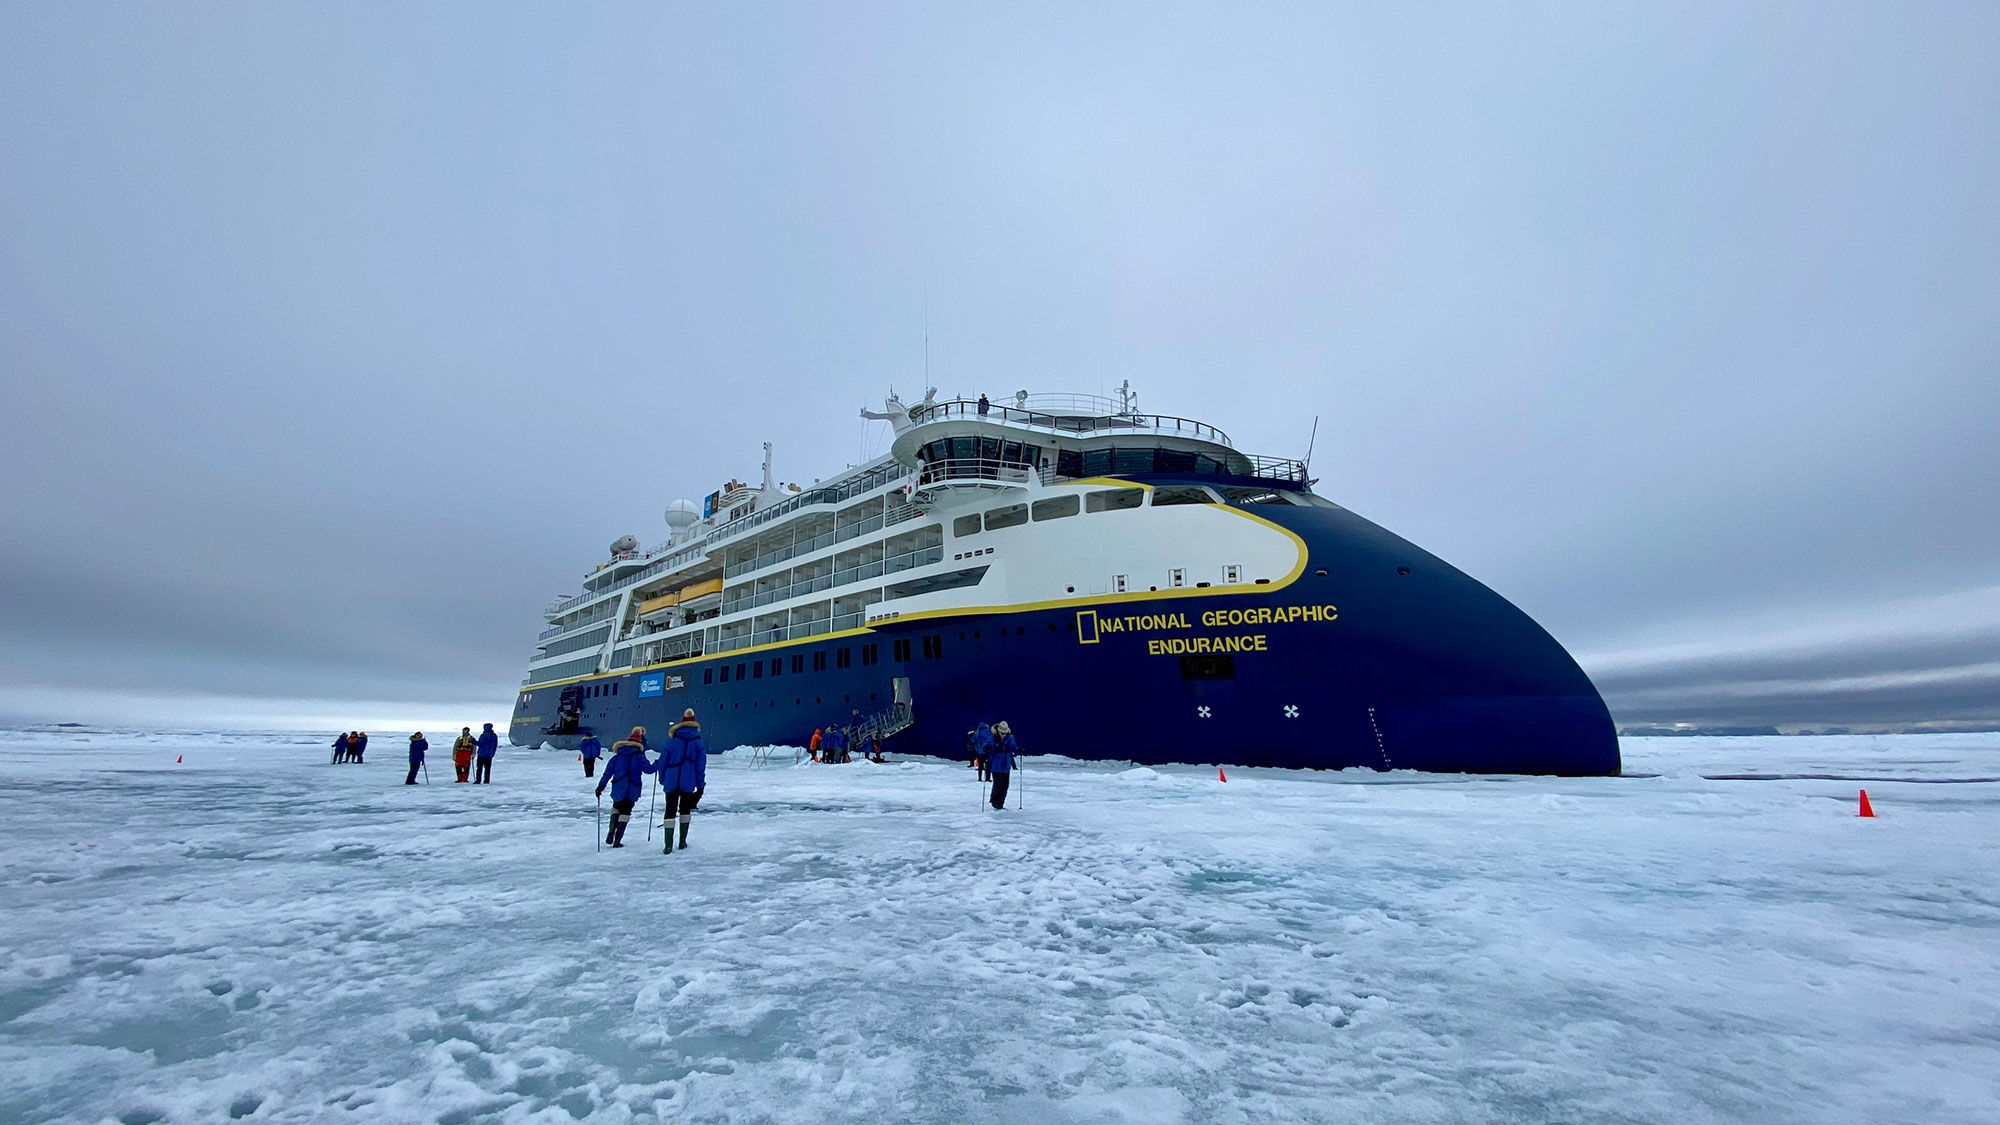 The National Geographic Endurance stopped in pack ice in Svalbard, and passengers were able to disembark and walk on the ice.